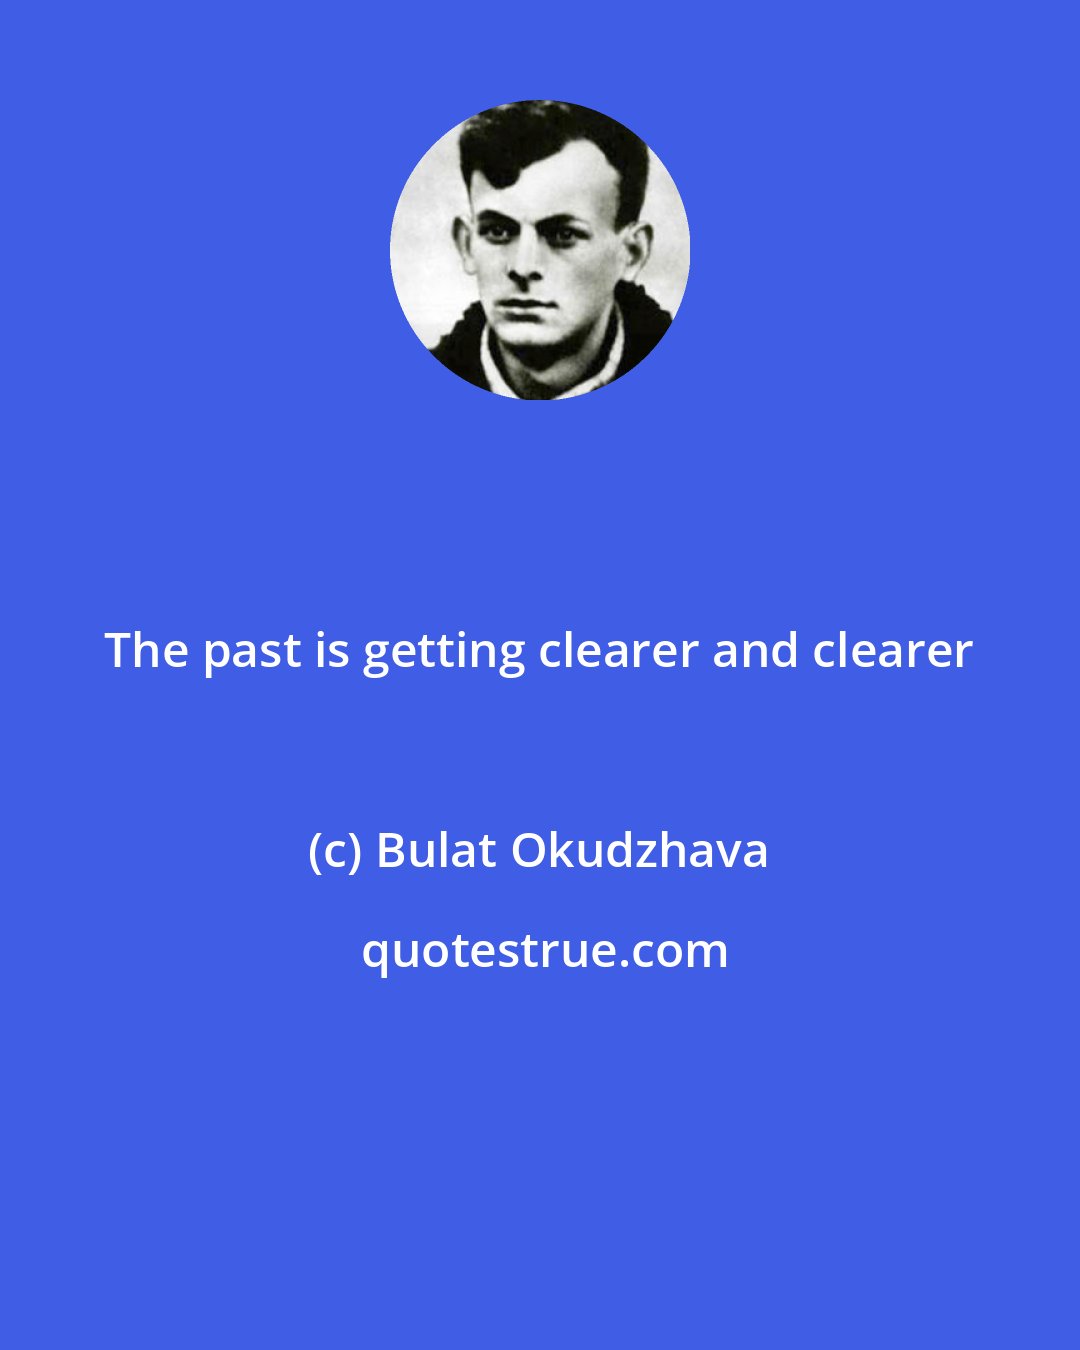 Bulat Okudzhava: The past is getting clearer and clearer